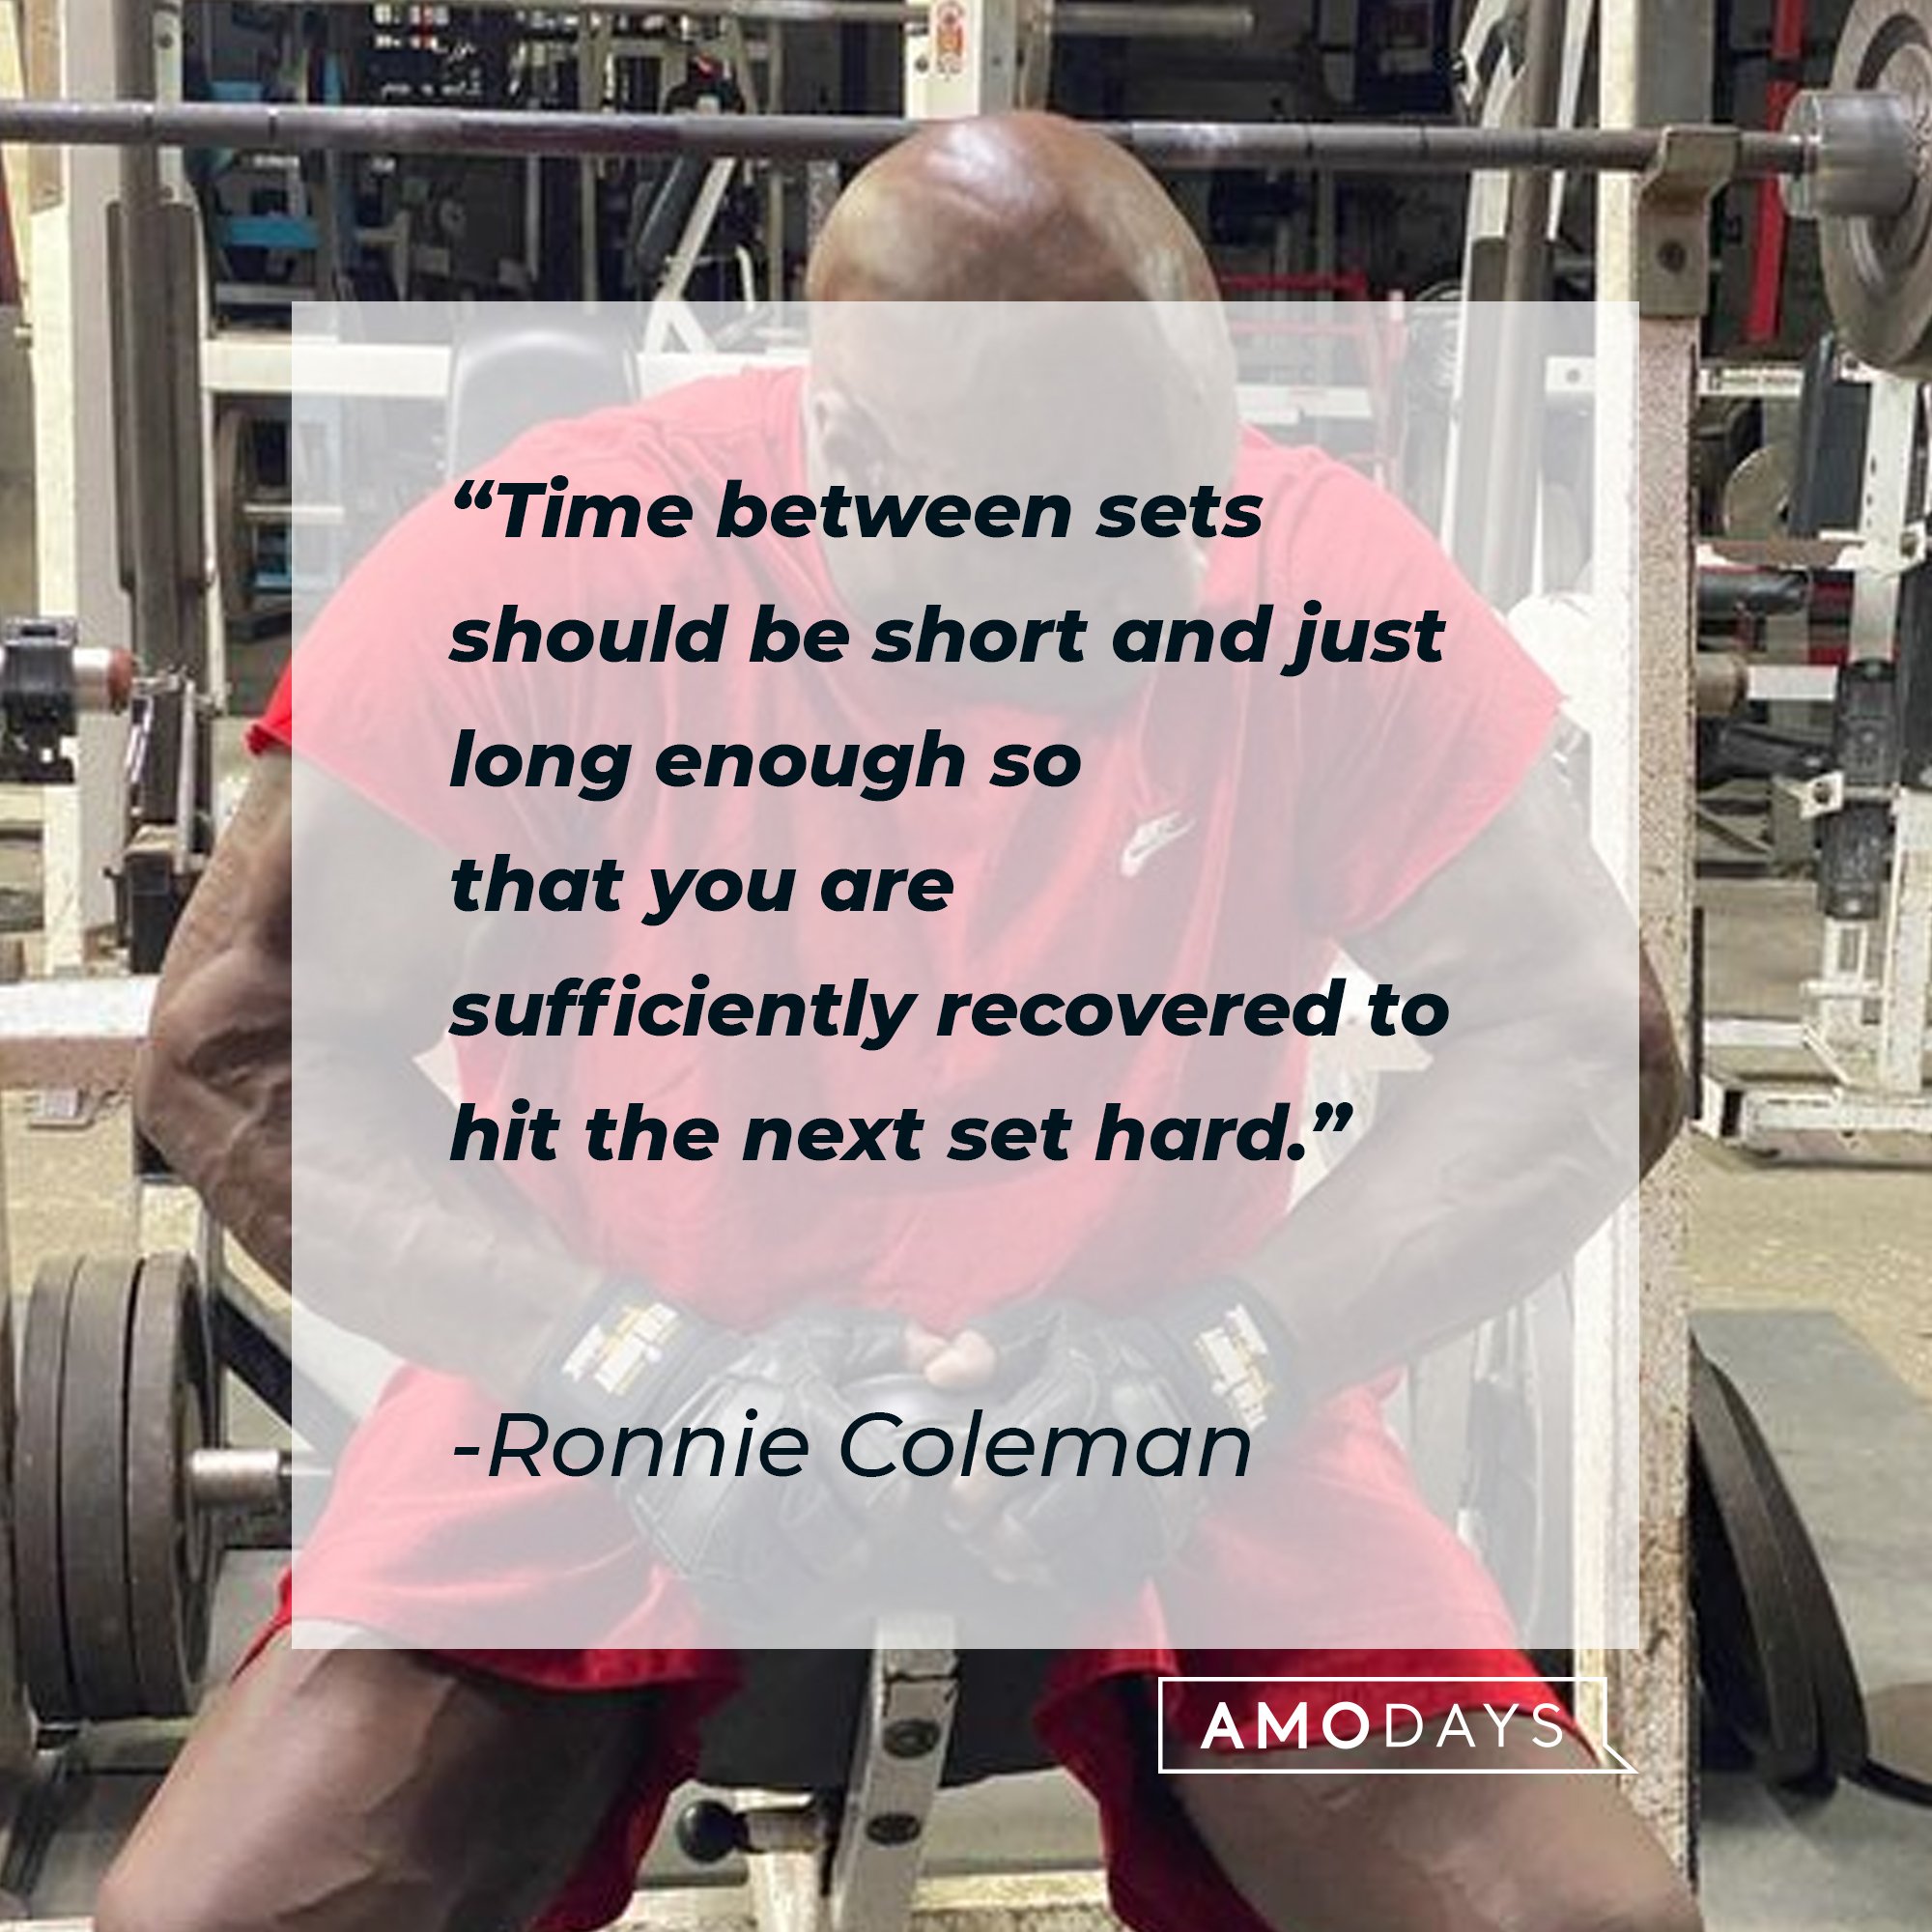  Ronnie Coleman’s quote: “Time between sets should be short and just long enough so that you are sufficiently recovered to hit the next set hard.” | Image: AmoDays